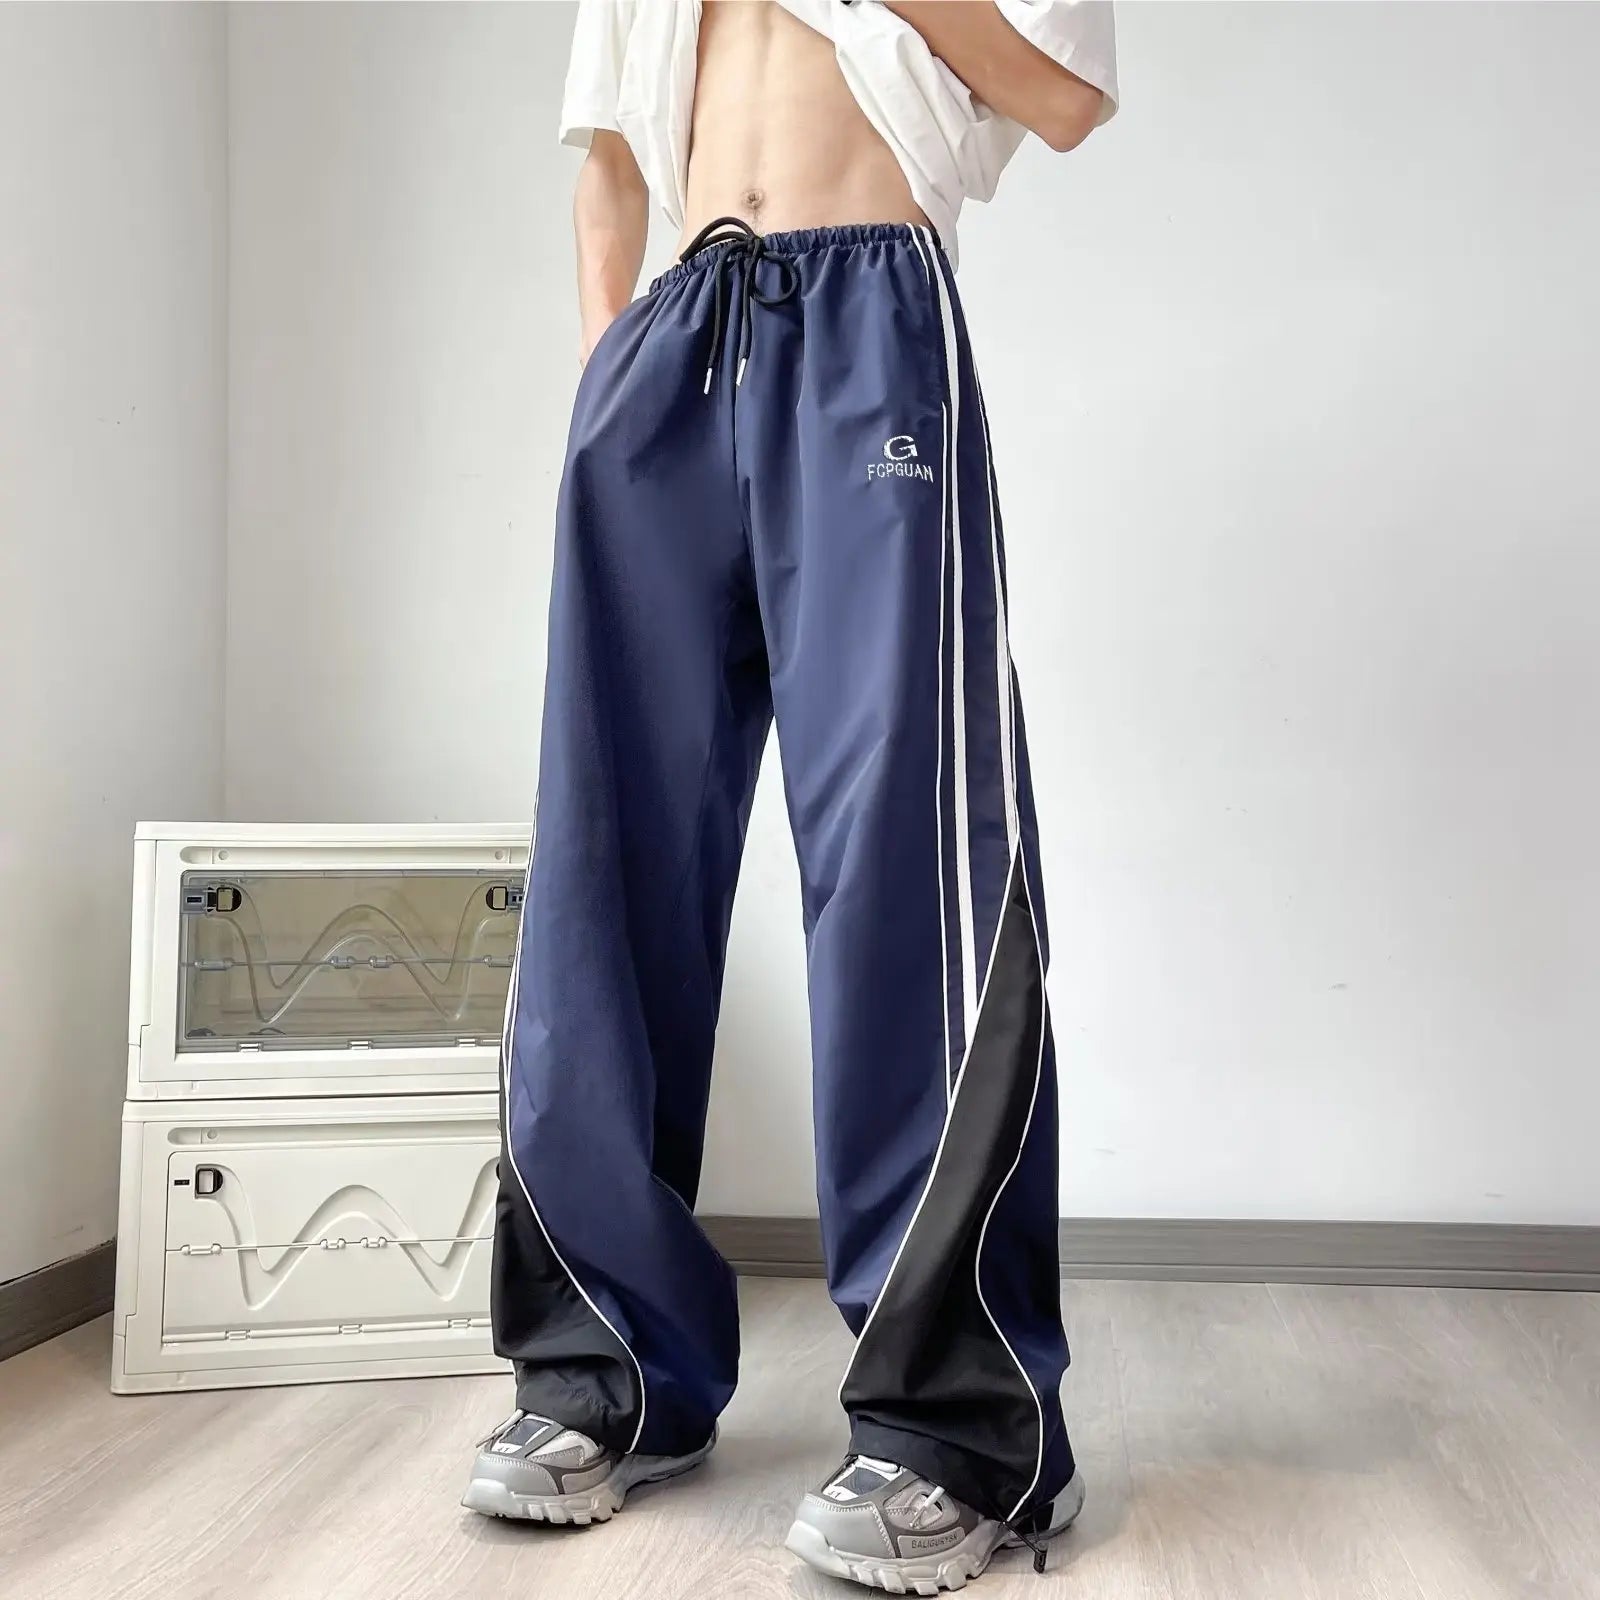 Cotton Full Length Ladies Gym Track Pants at Rs 190/piece in Ludhiana | ID:  15863519133